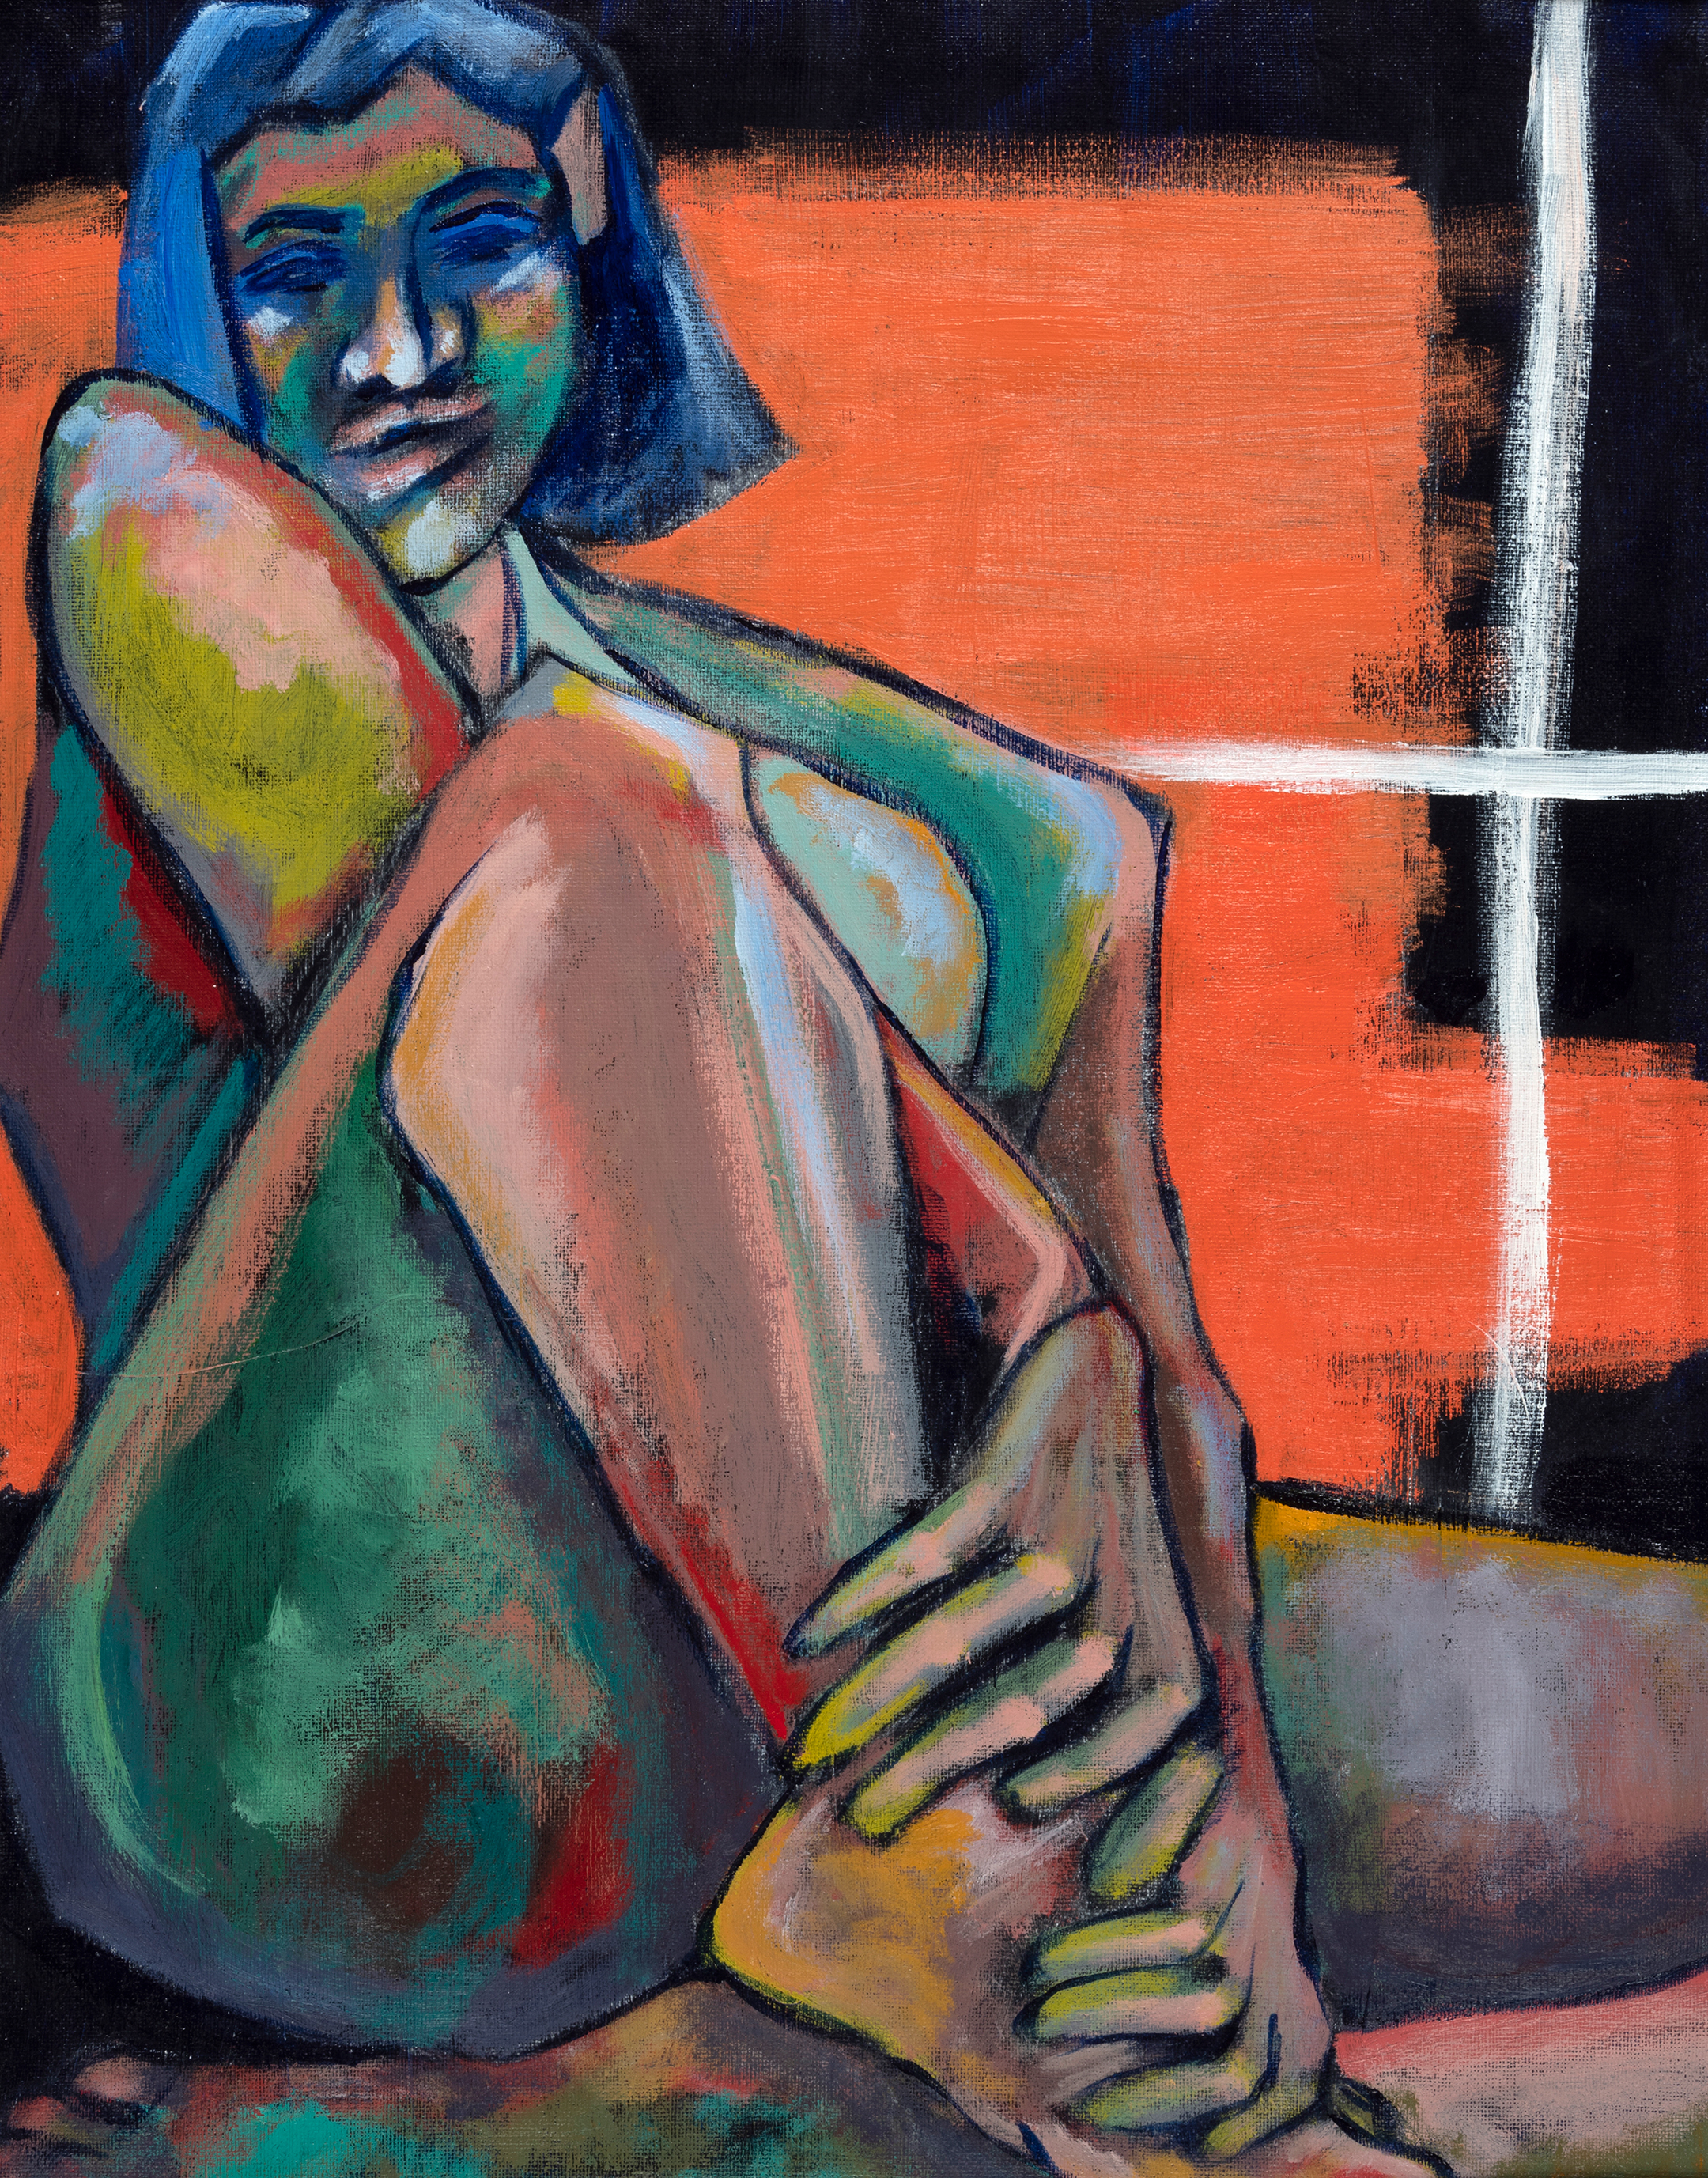 abstract painting of a female figure in blues, reds, and darker hues